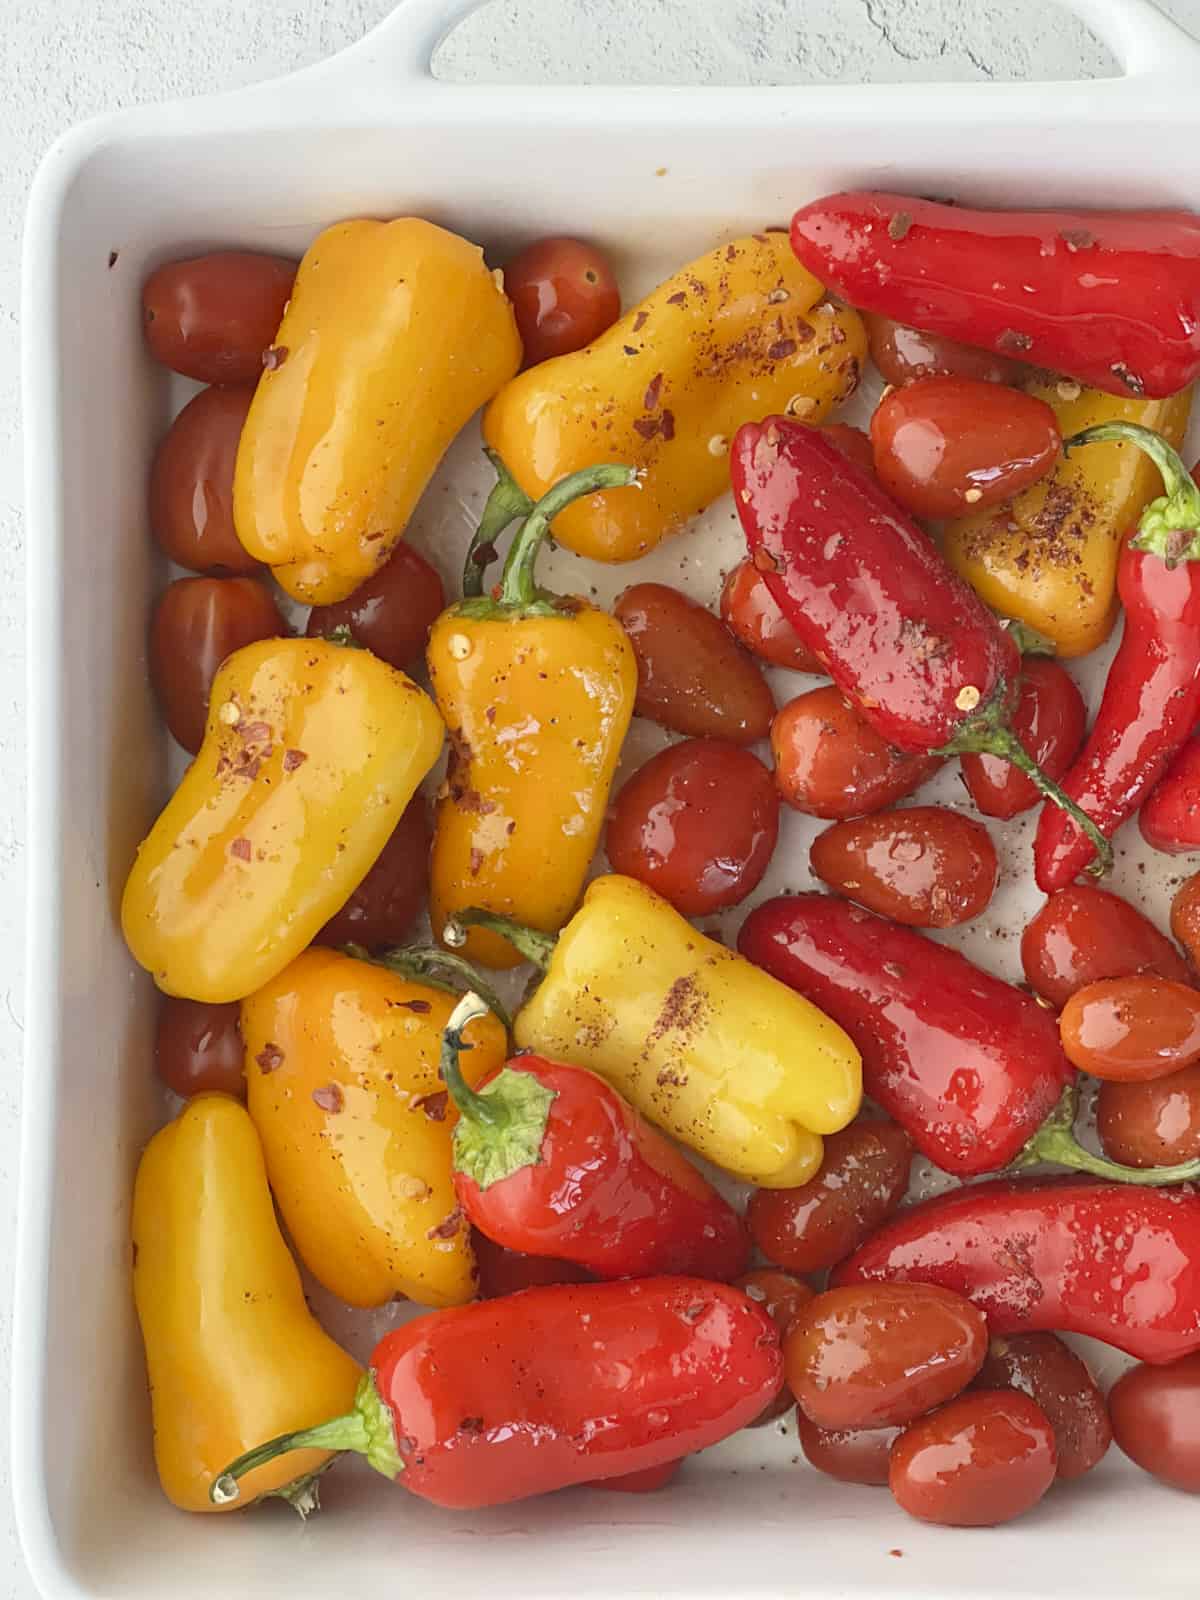 peppers and tomatoes in a baking dish coated with oil and seasonings